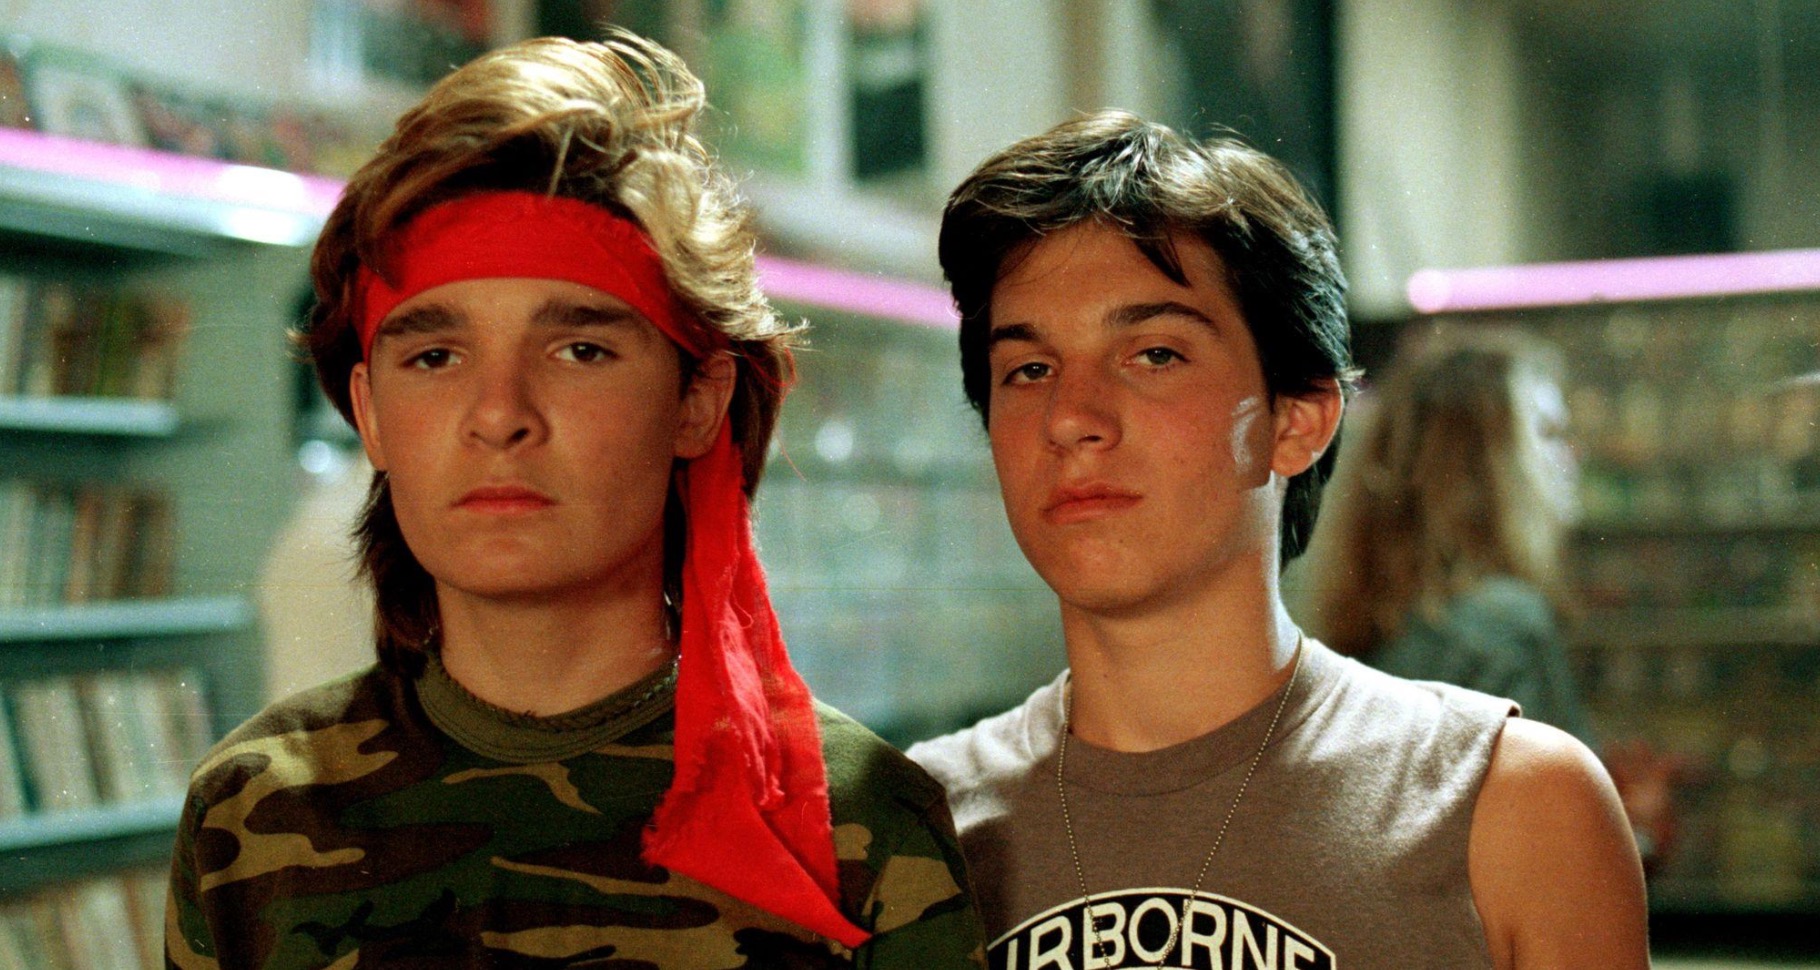 12 Things I Love About The Lost Boys That Have Nothing To Do With Vampires